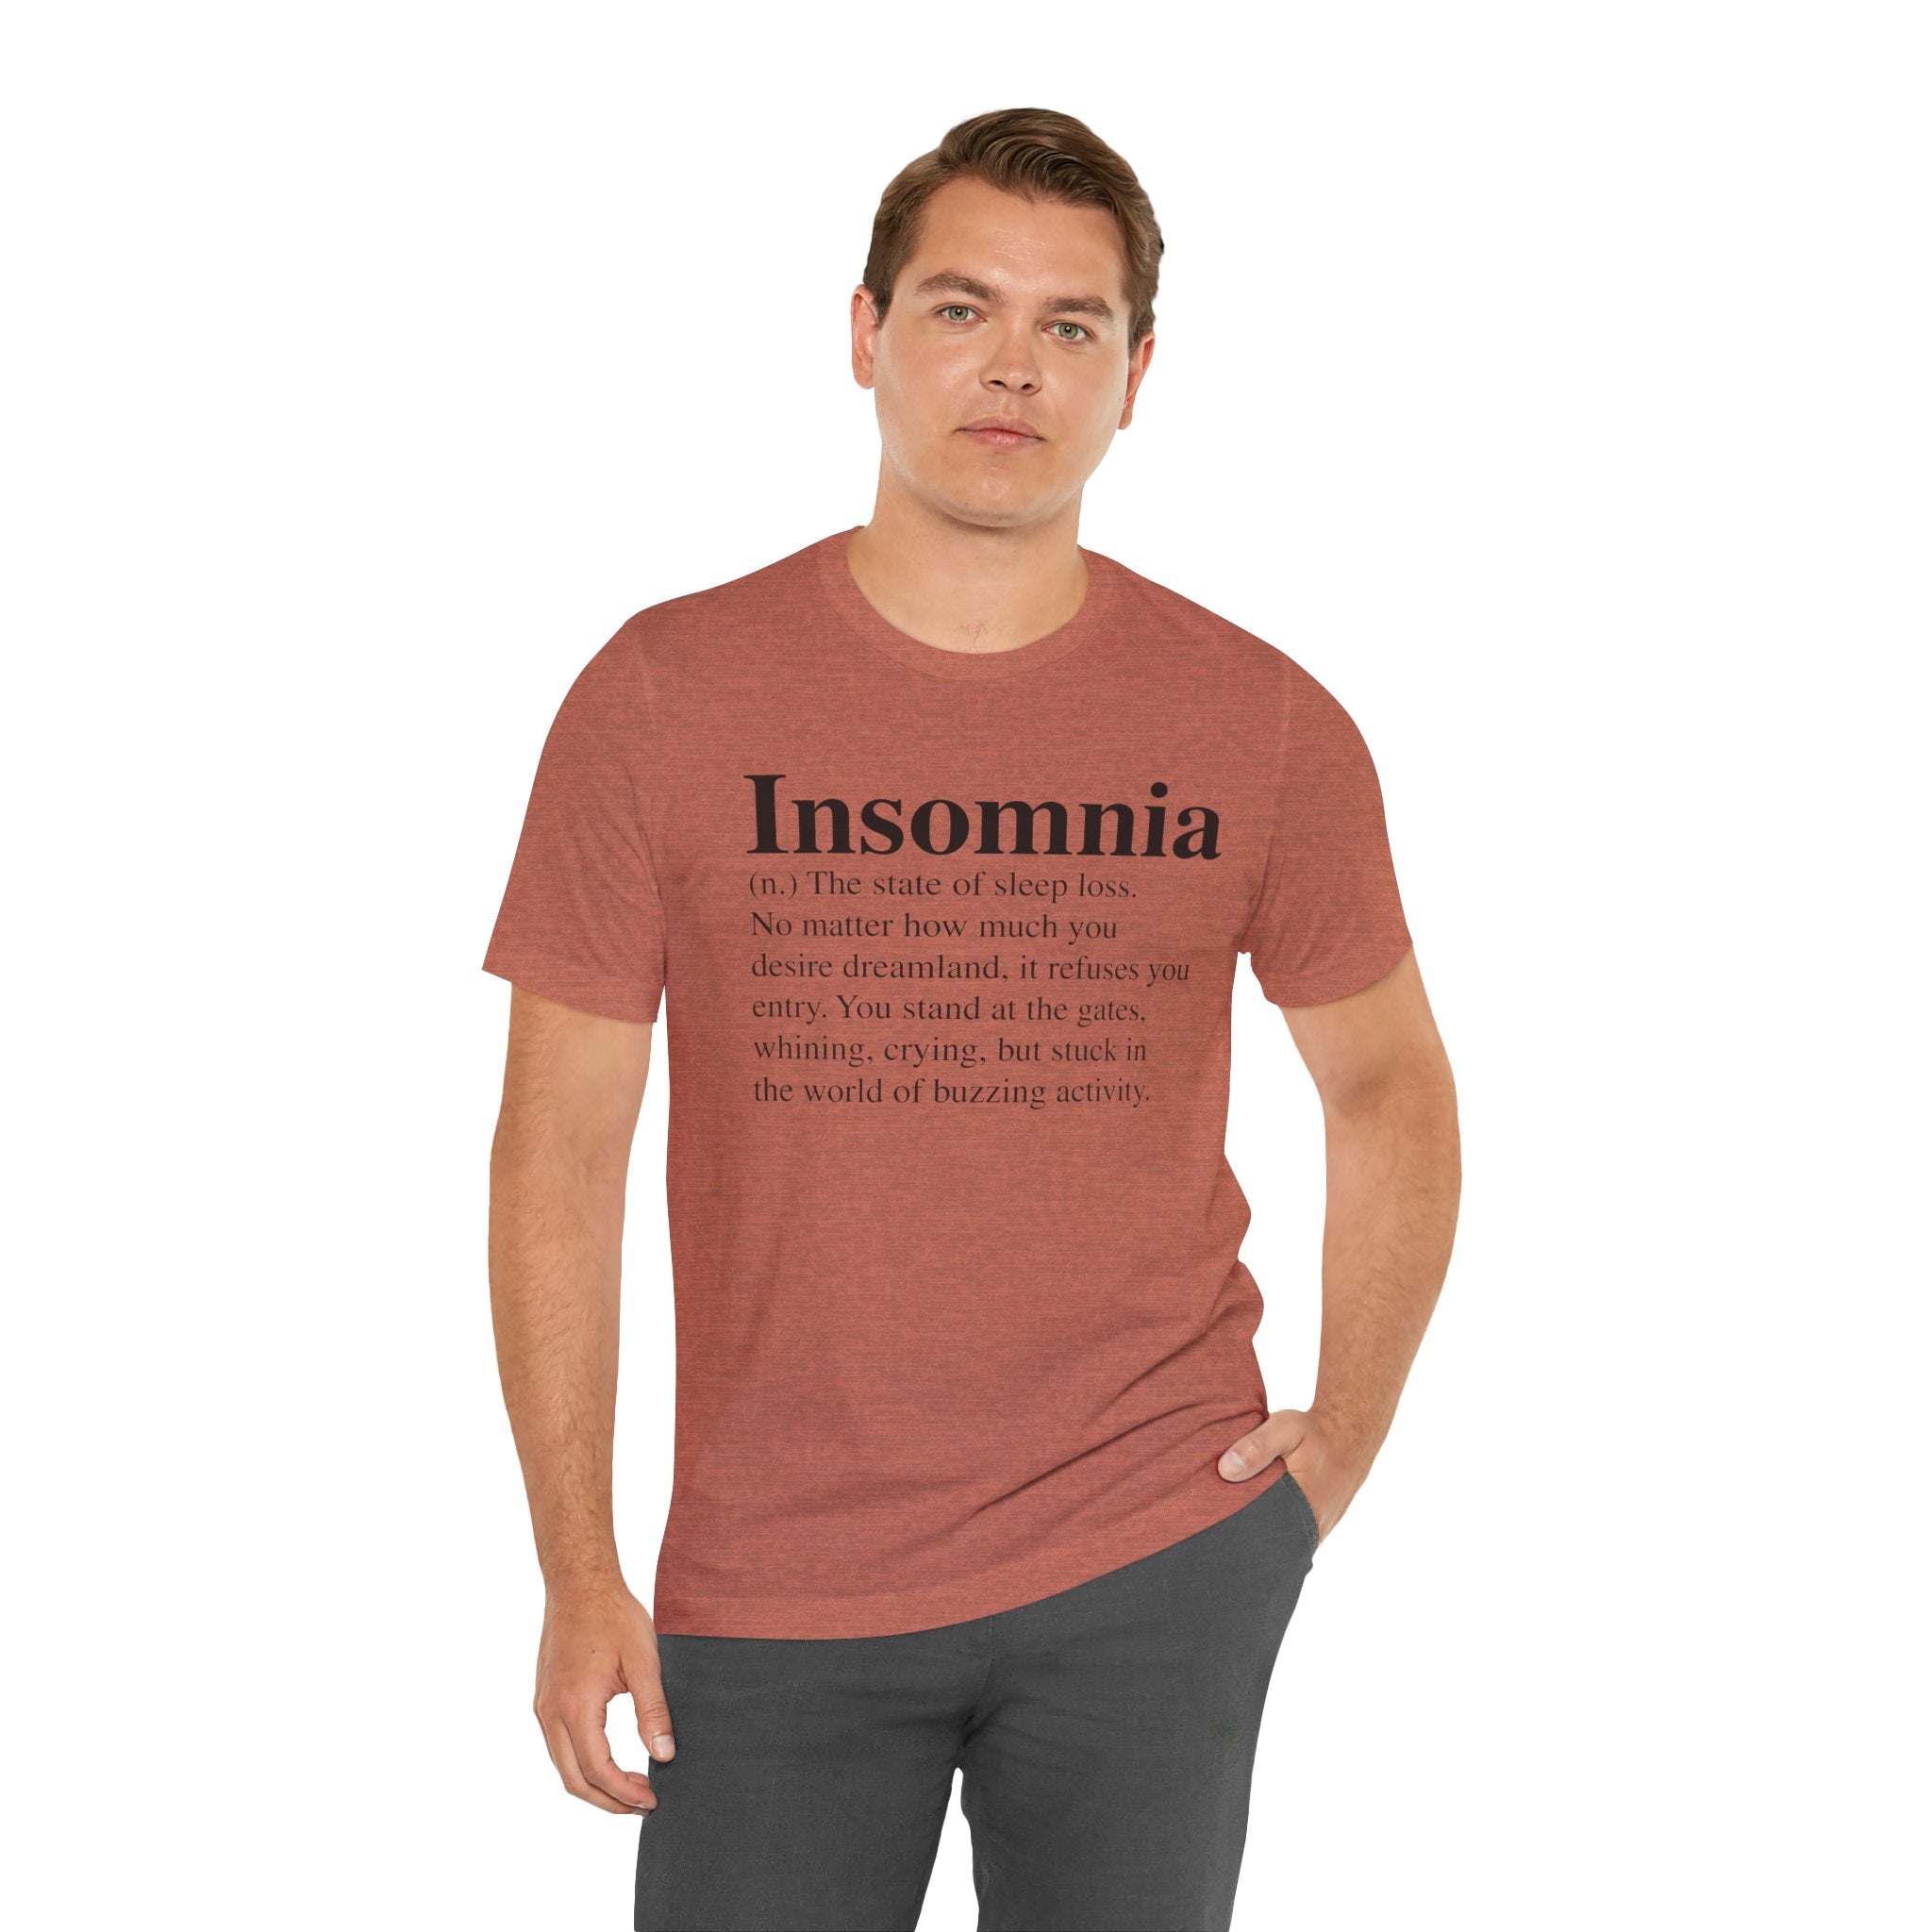 Man in an Insomnia T-Shirt in maroon with the word "insomnia" and its definition printed in white text, standing against a plain background.